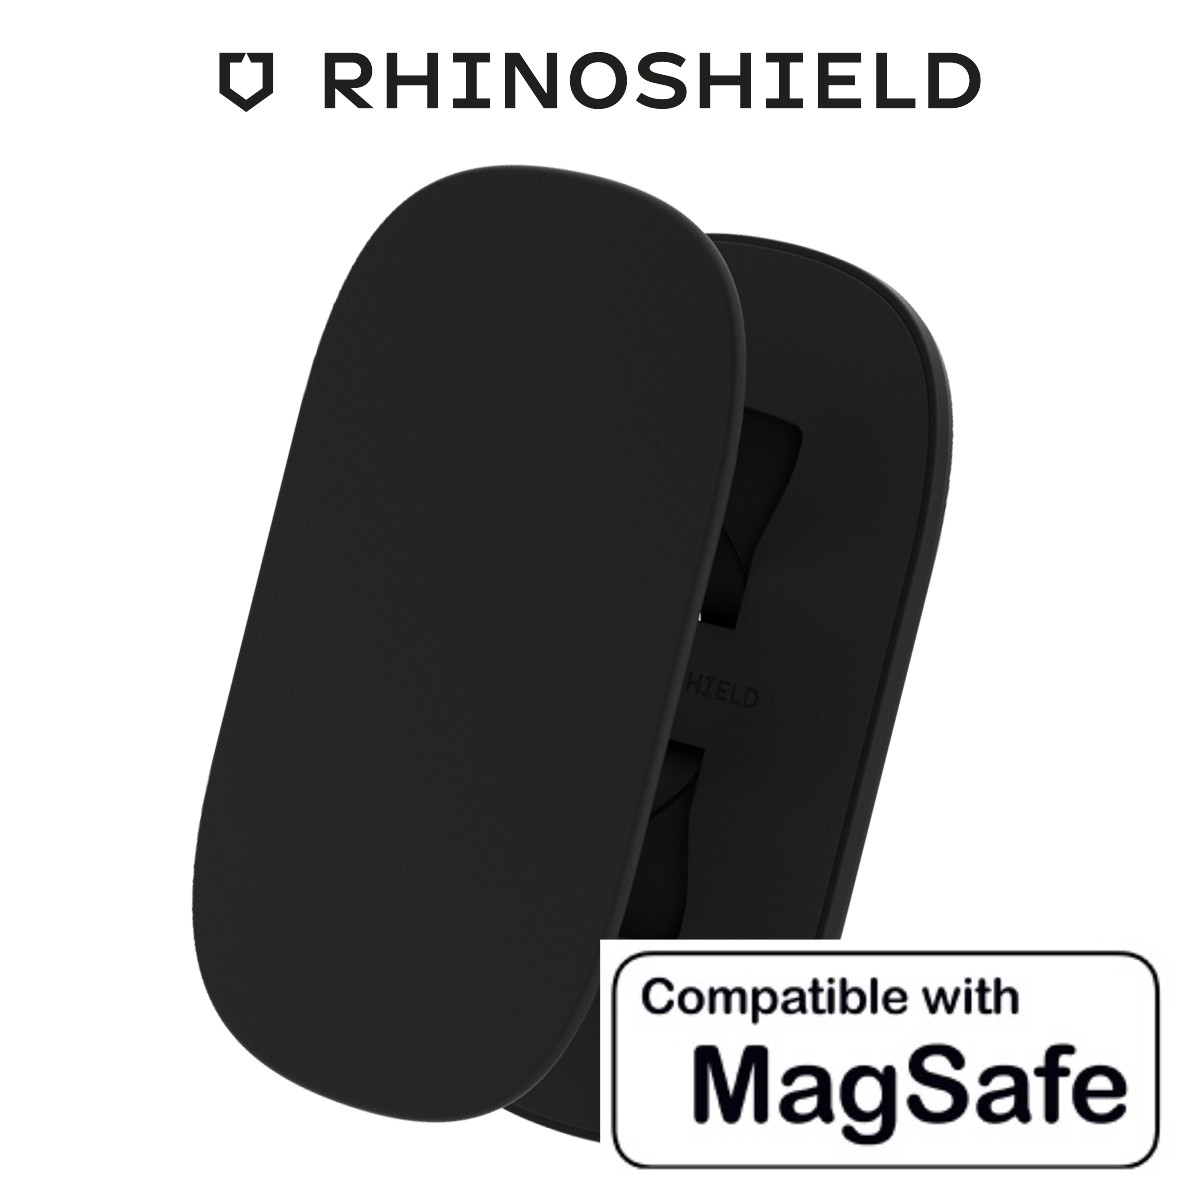 SUPPORT MAGNÉTIQUE MAGSAFE POUR APPLE - GRIP MAX MAGSAFE - RHINOSHIELD?  (STG00254N3)